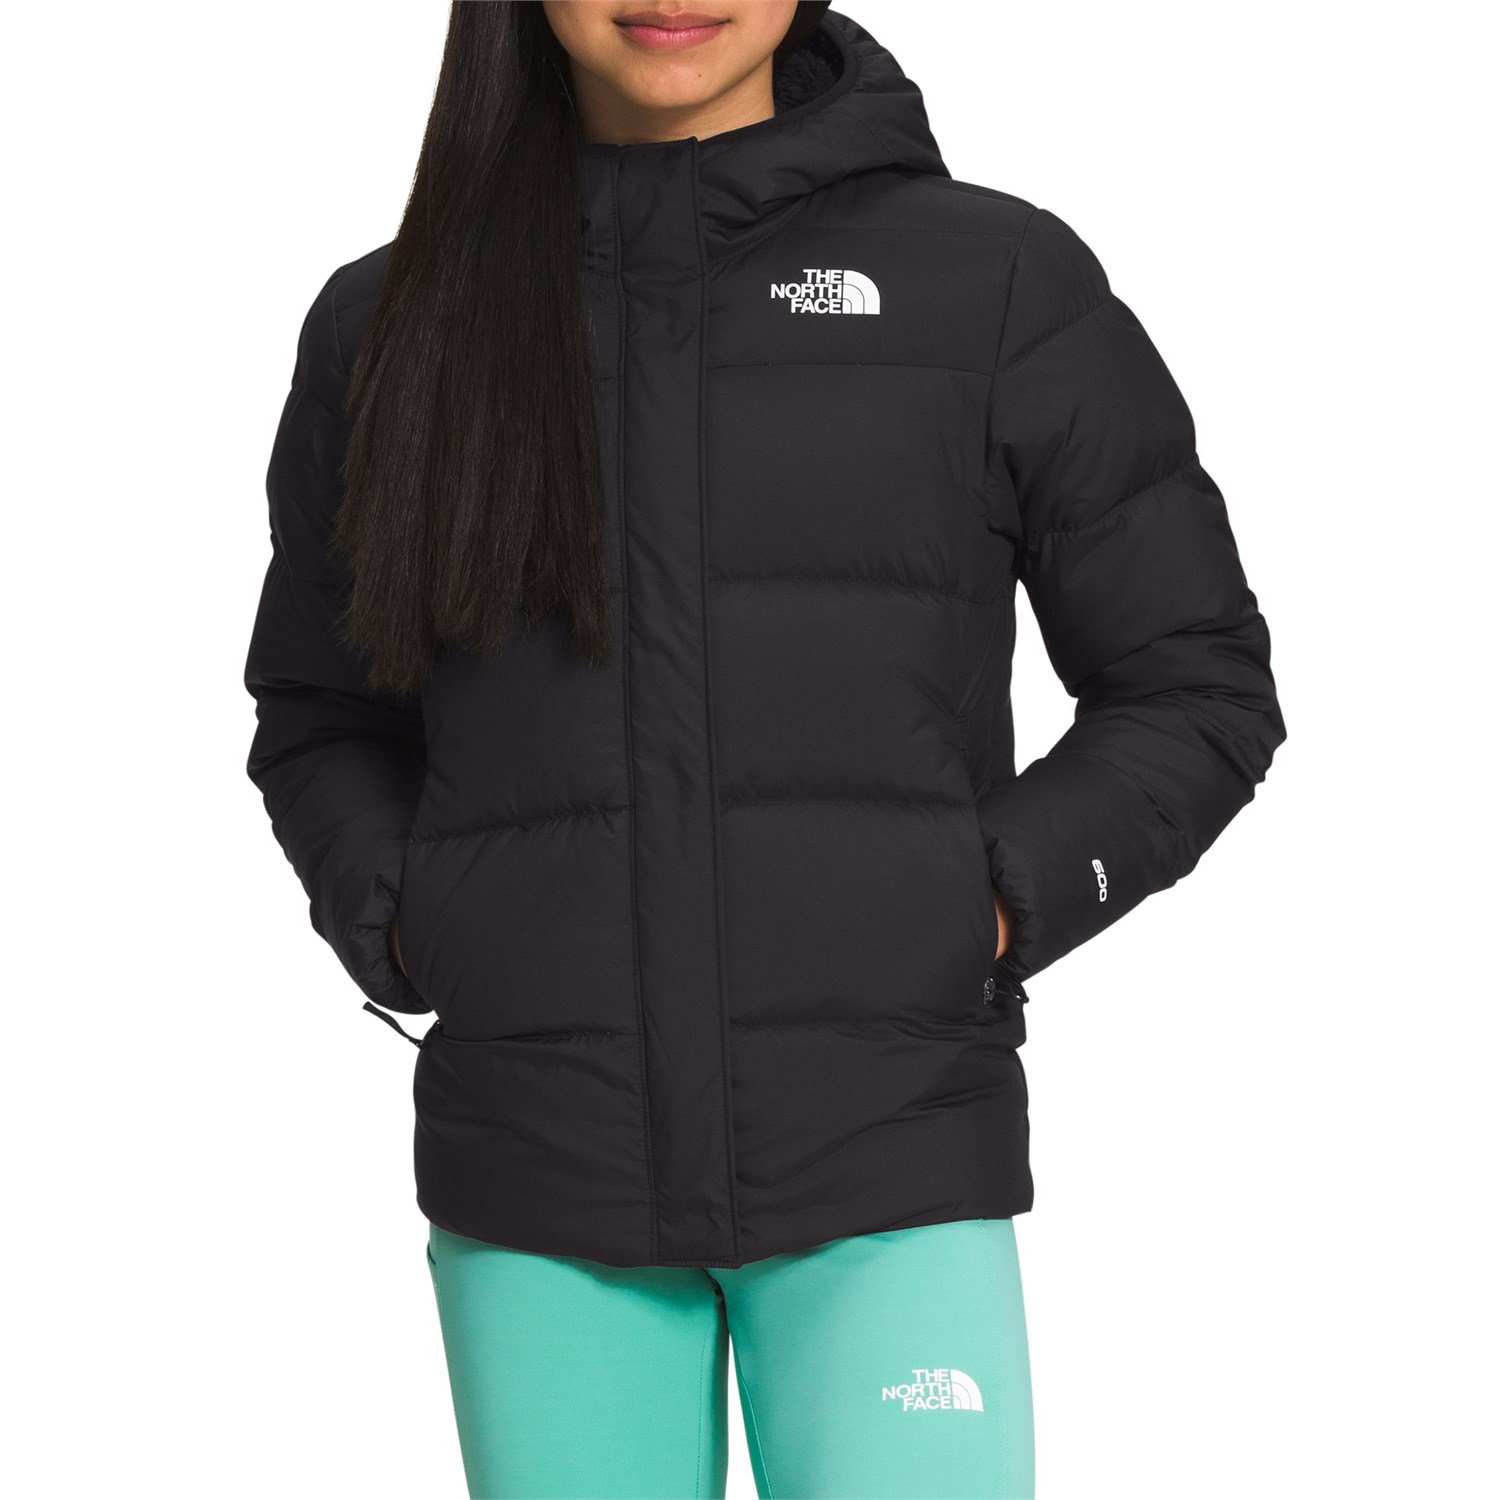 https://images.evo.com/imgp/zoom/223953/942460/the-north-face-north-down-fleece-lined-parka-girls-.jpg